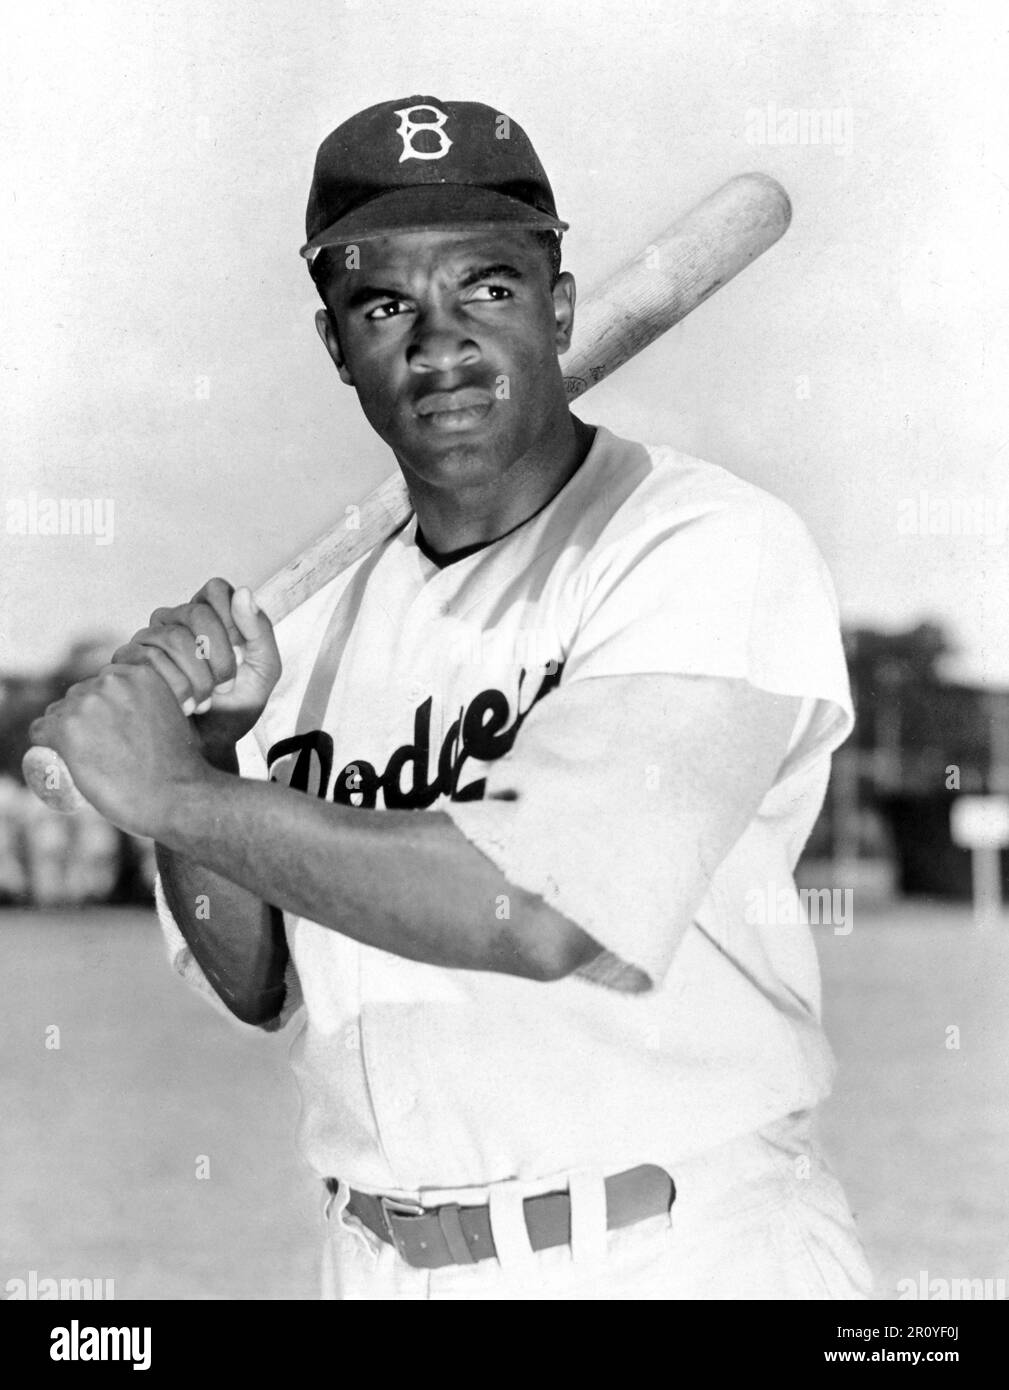 Jackie Robinson (1919-1972) in Brookly Dodgers uniform, 1949. Robinson was the first black player in Major League Baseball. Stock Photo